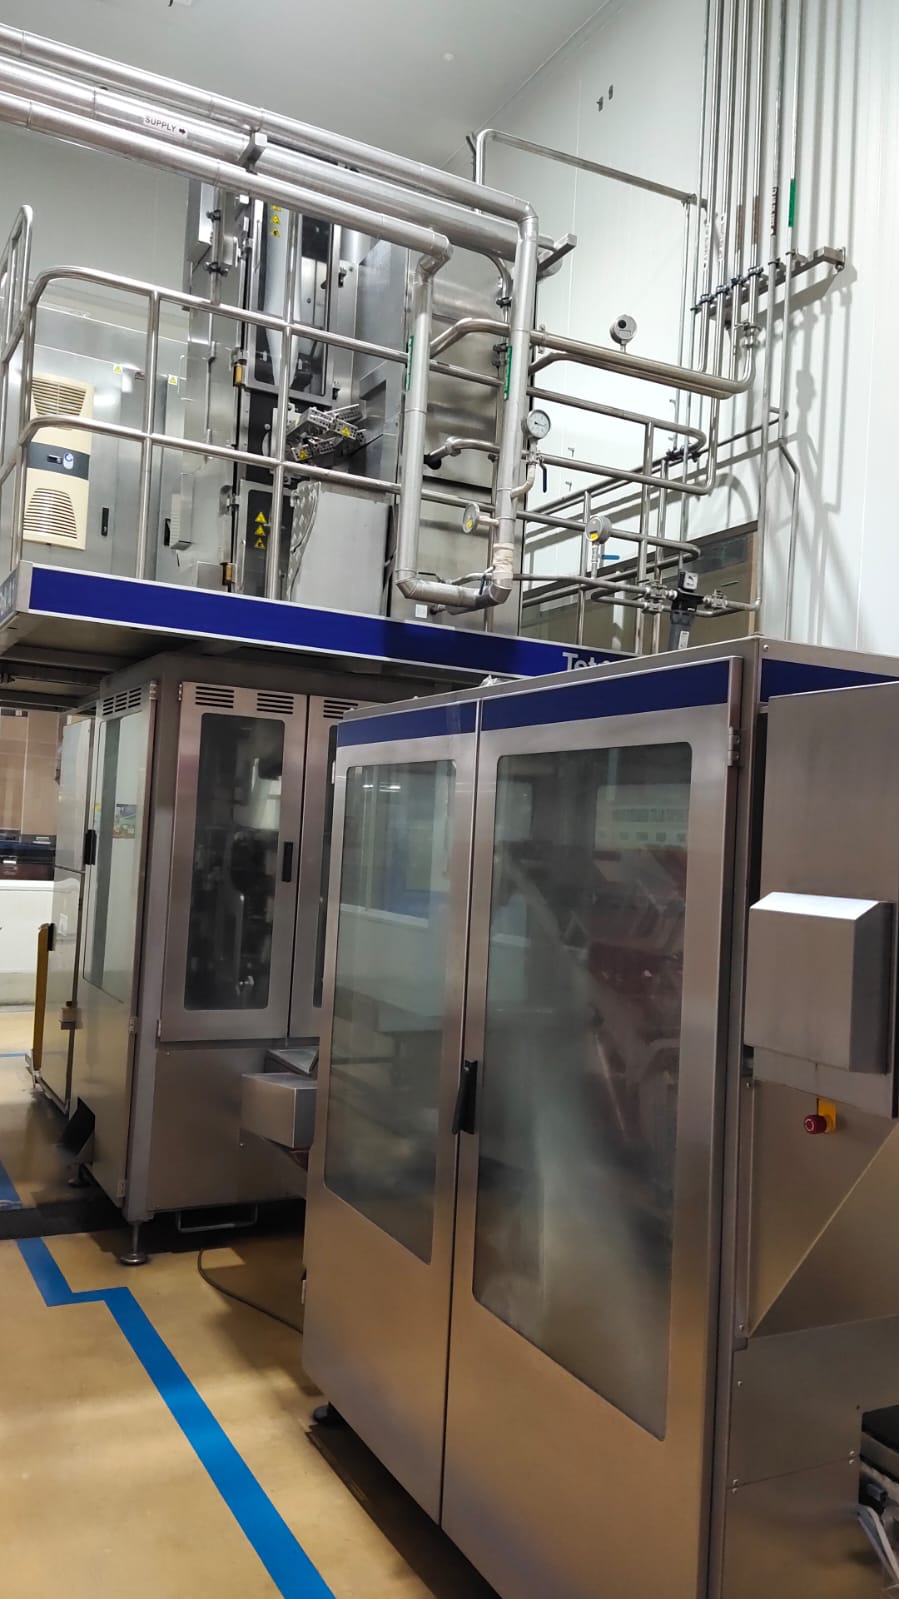 USED TETRA PAK A1 200ML WEDGE FILLING LINE AND UHT PLANT FOR SALE